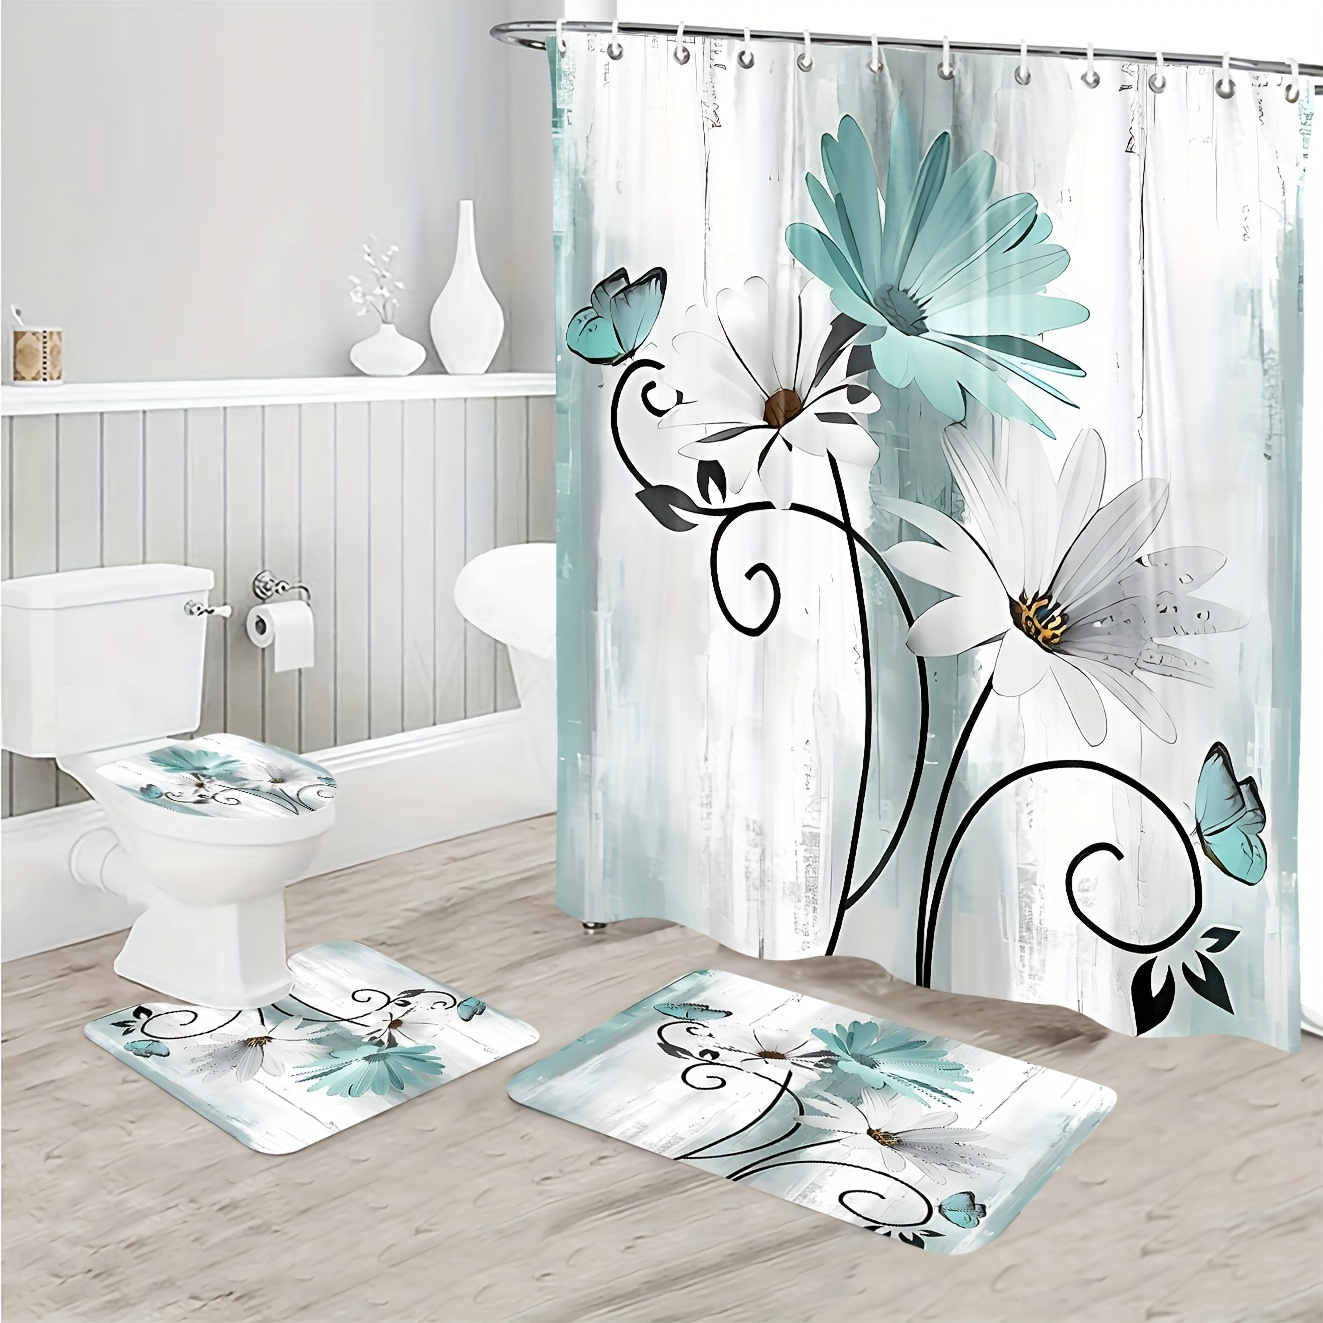 Floral Teal Shower Curtain Sets with 12 Hooks Shower Curtain